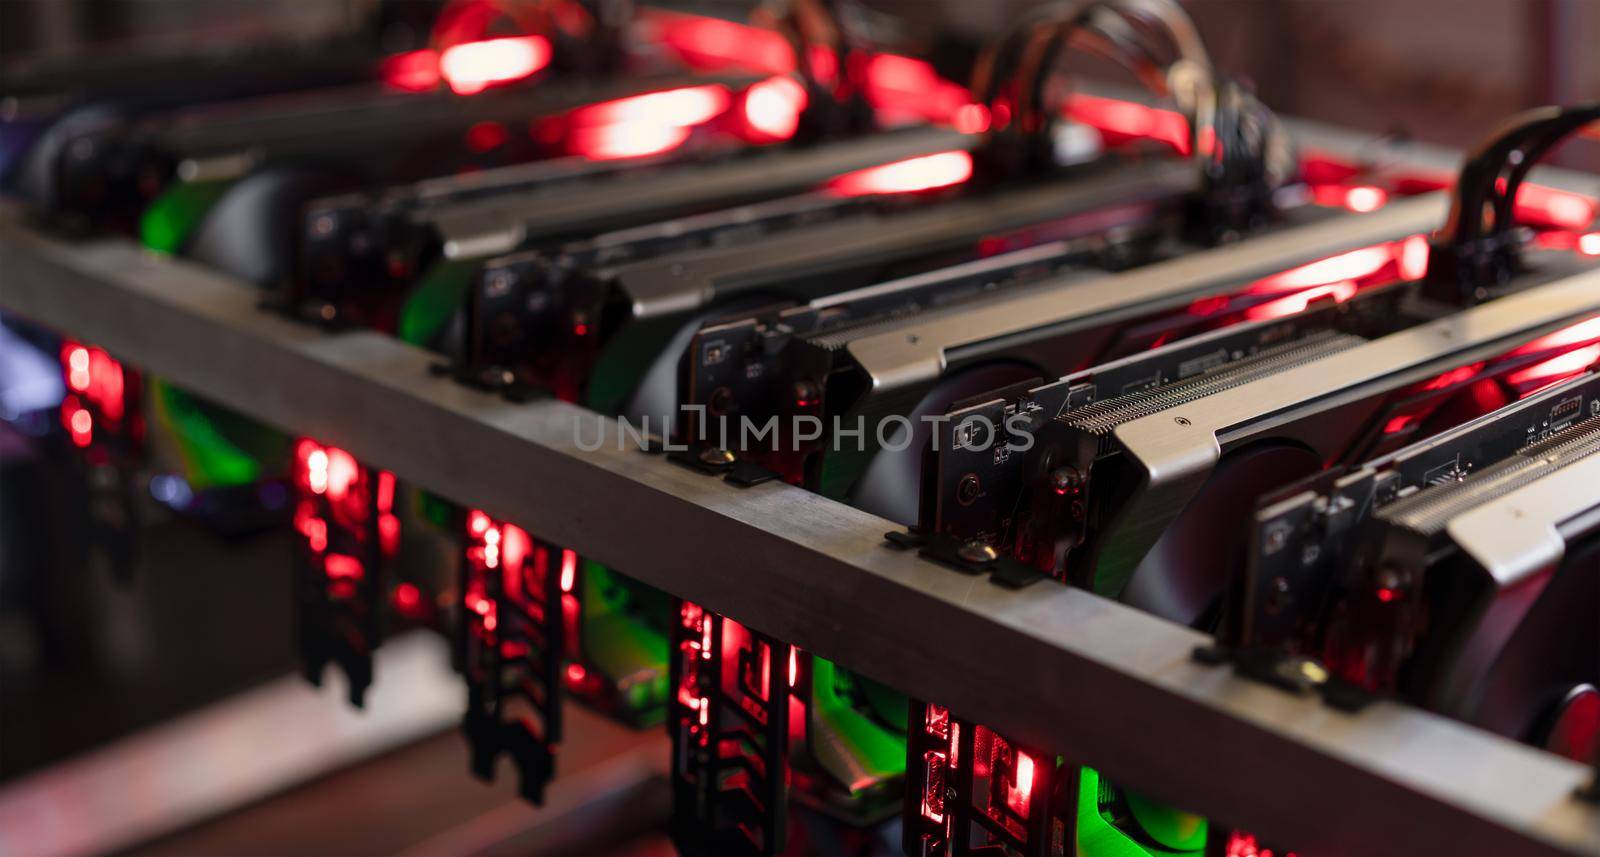 Graphics card for mining for bitcoin mining farm